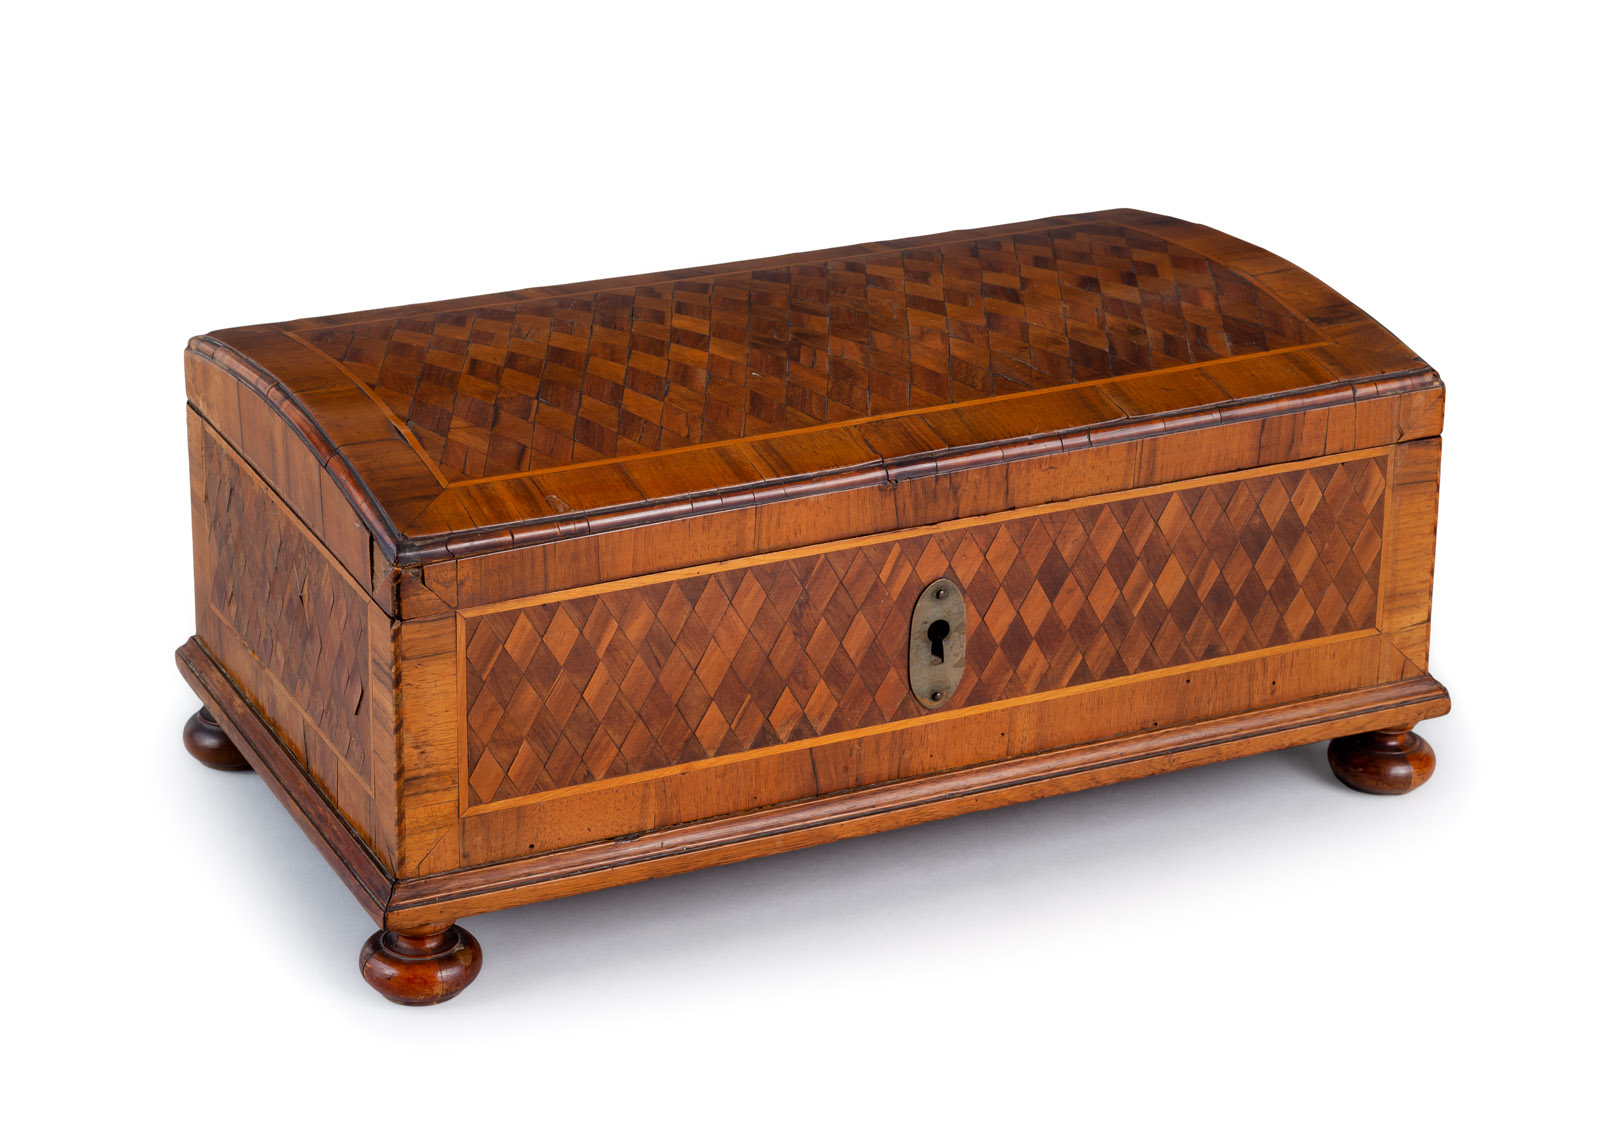 A FINE CASKET WITH RHOMBUS MARQUETRY - Image 2 of 3